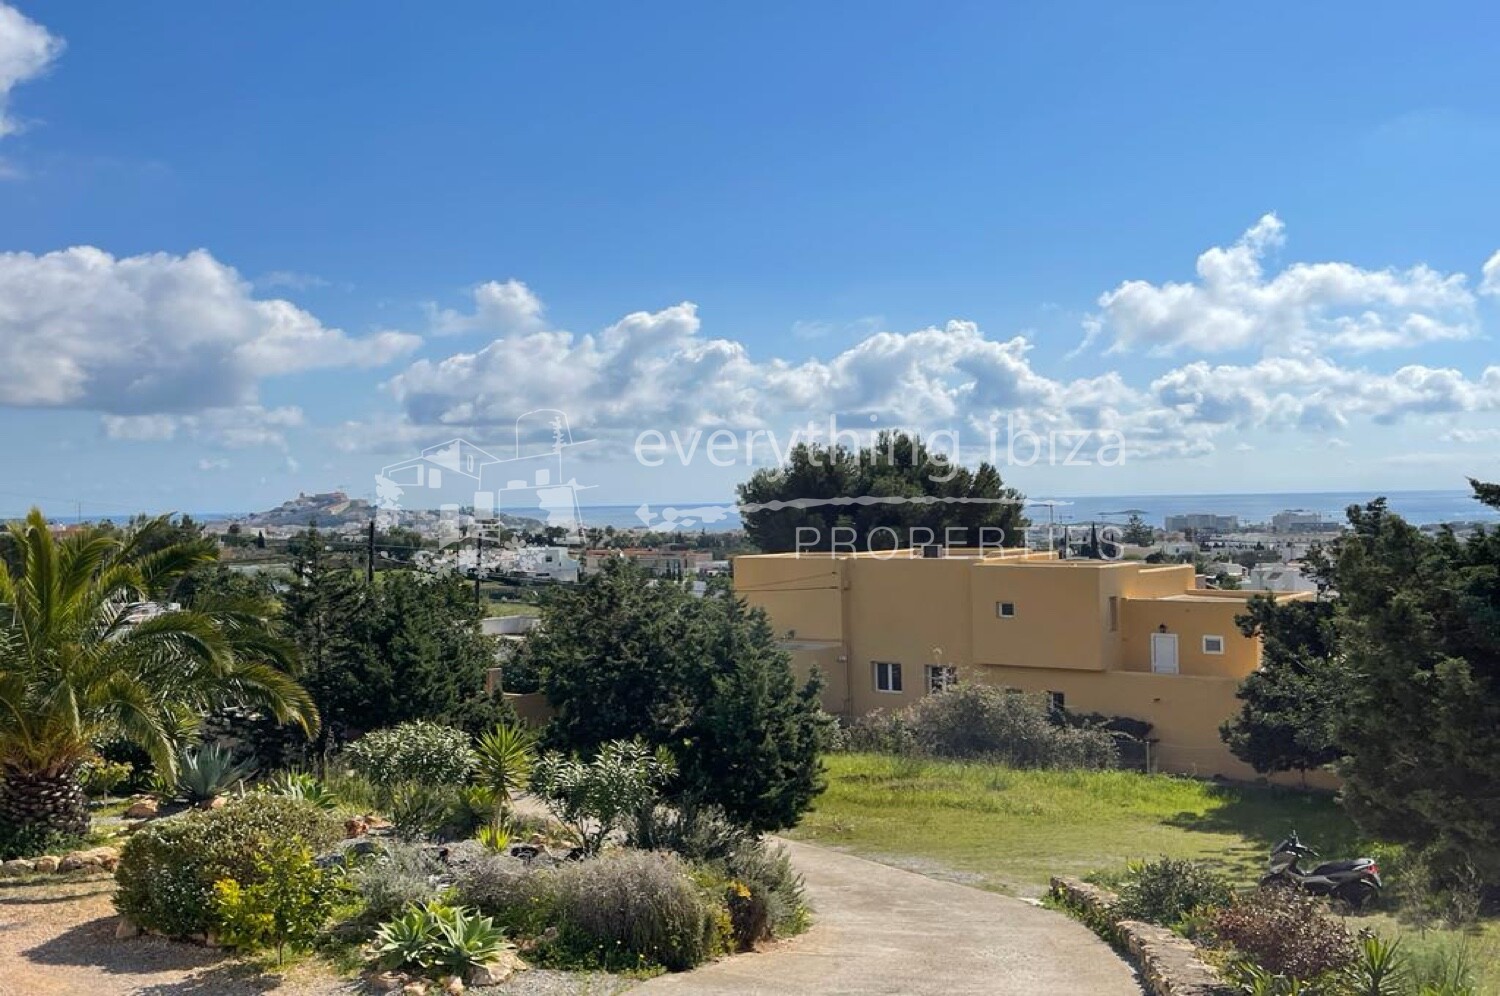 Magnificent Modern Villa with Super Panoramic Views, ref. 1433, for sale in Ibiza by everything ibiza Properties